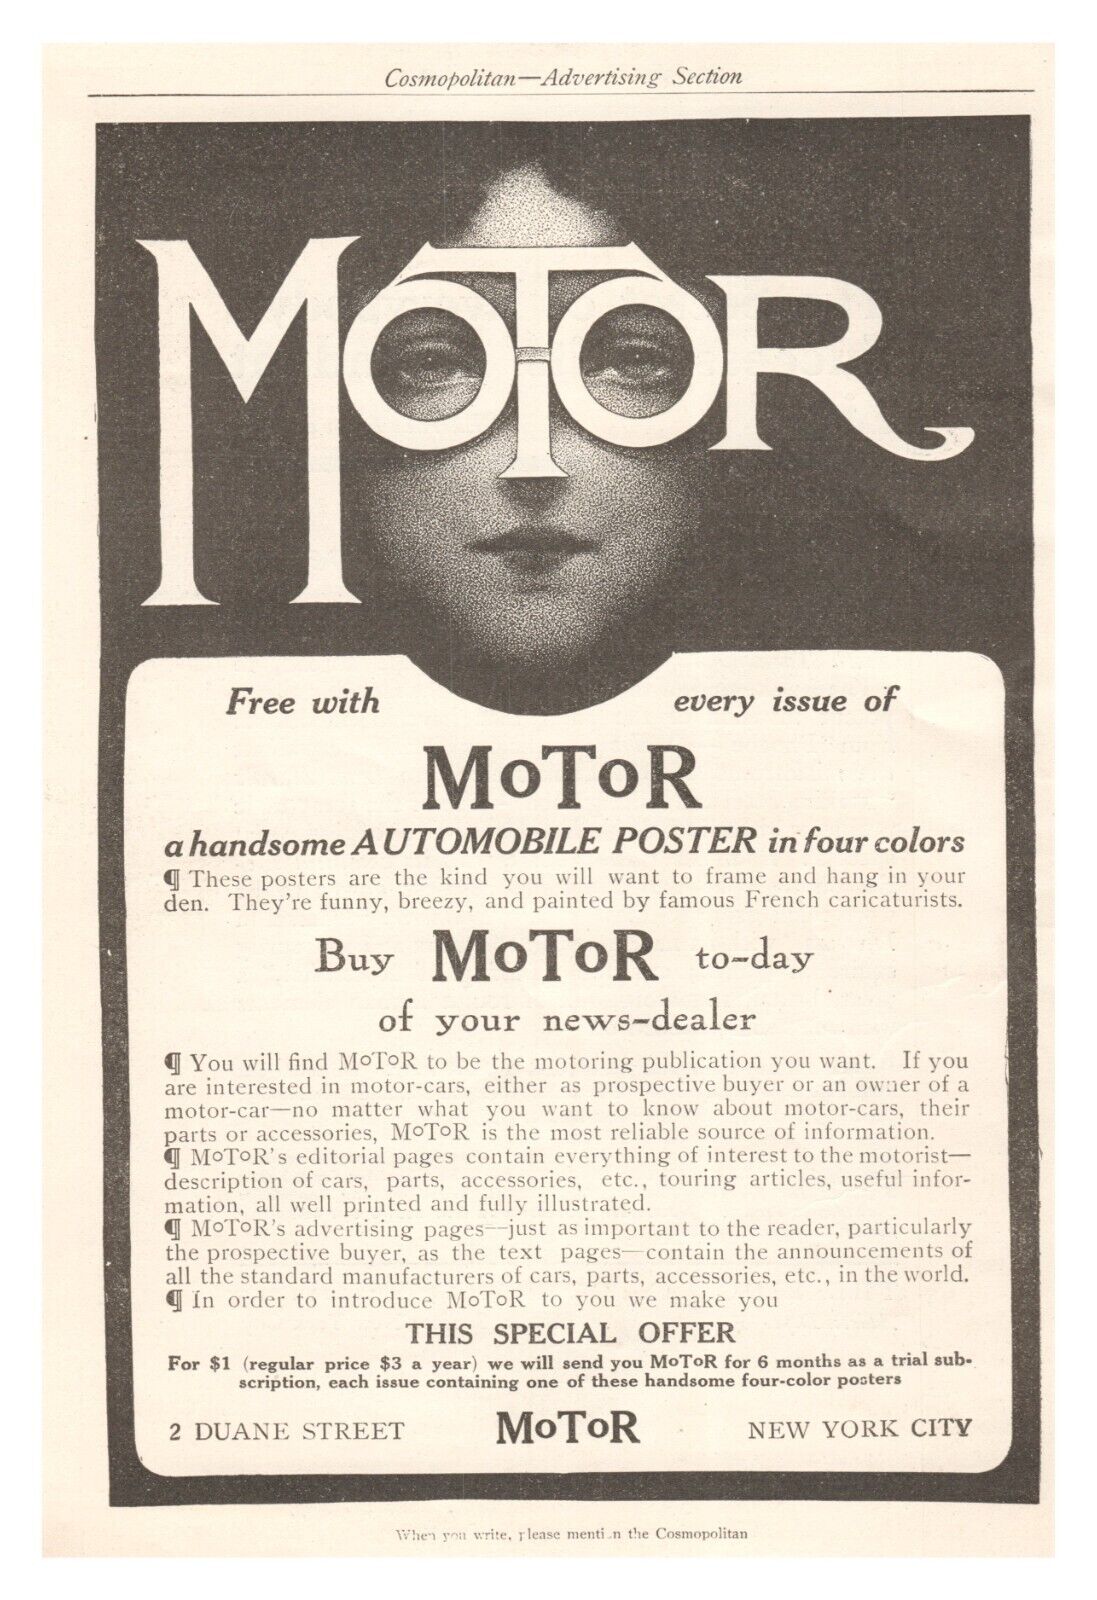 Print Ad 1907 MoToR Magazine Offer Free Color Automobile Poster New York City